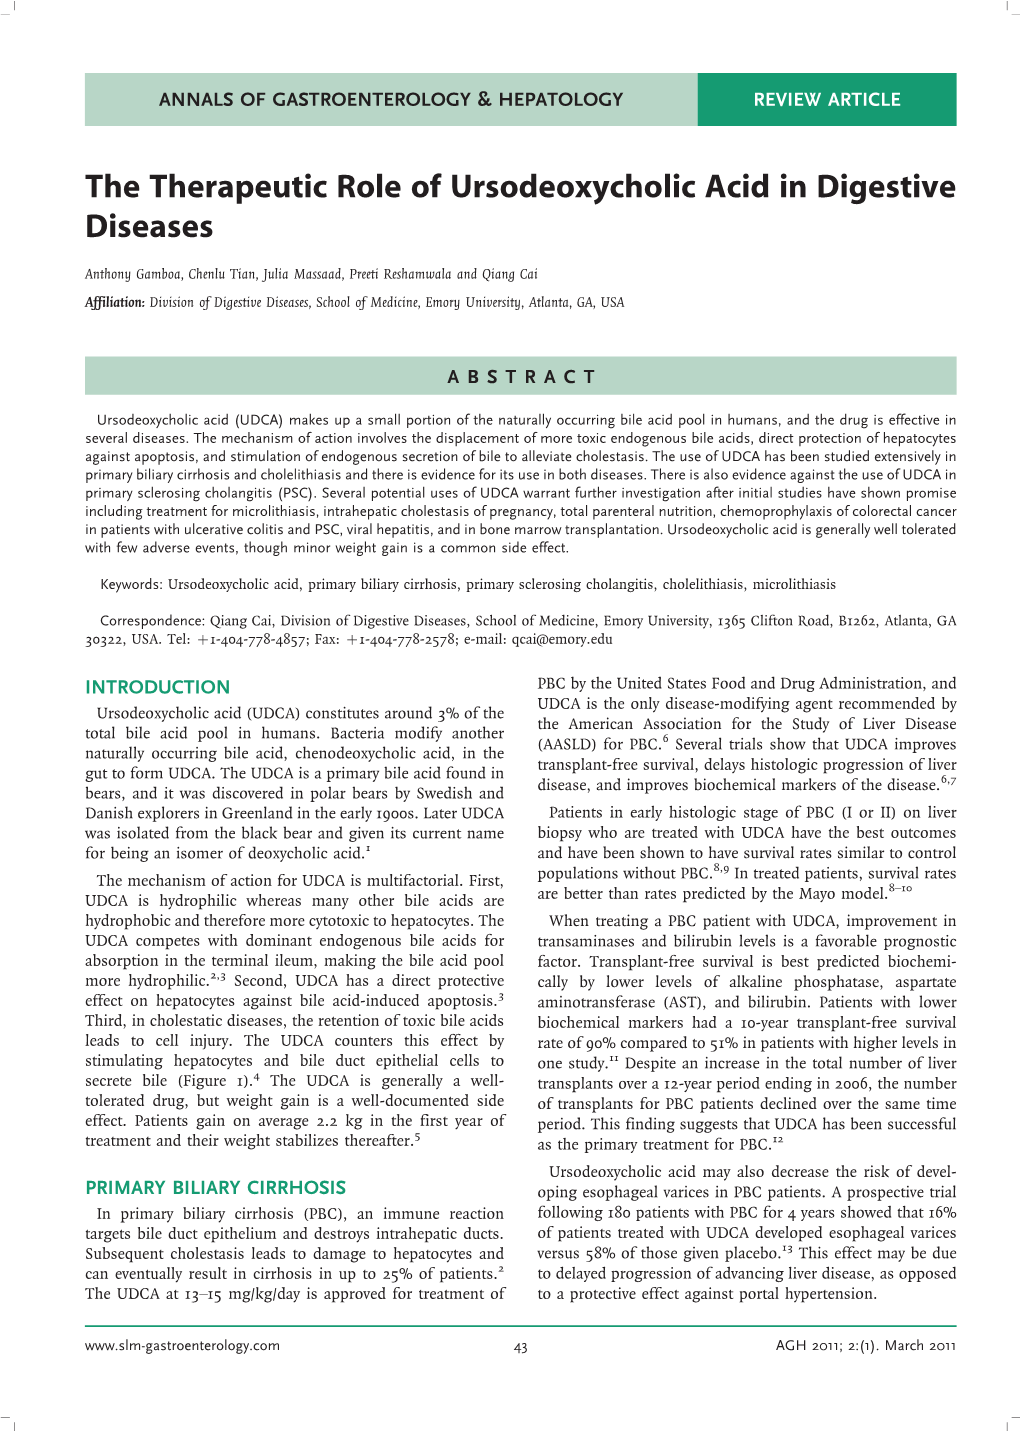 The Therapeutic Role of Ursodeoxycholic Acid in Digestive Diseases